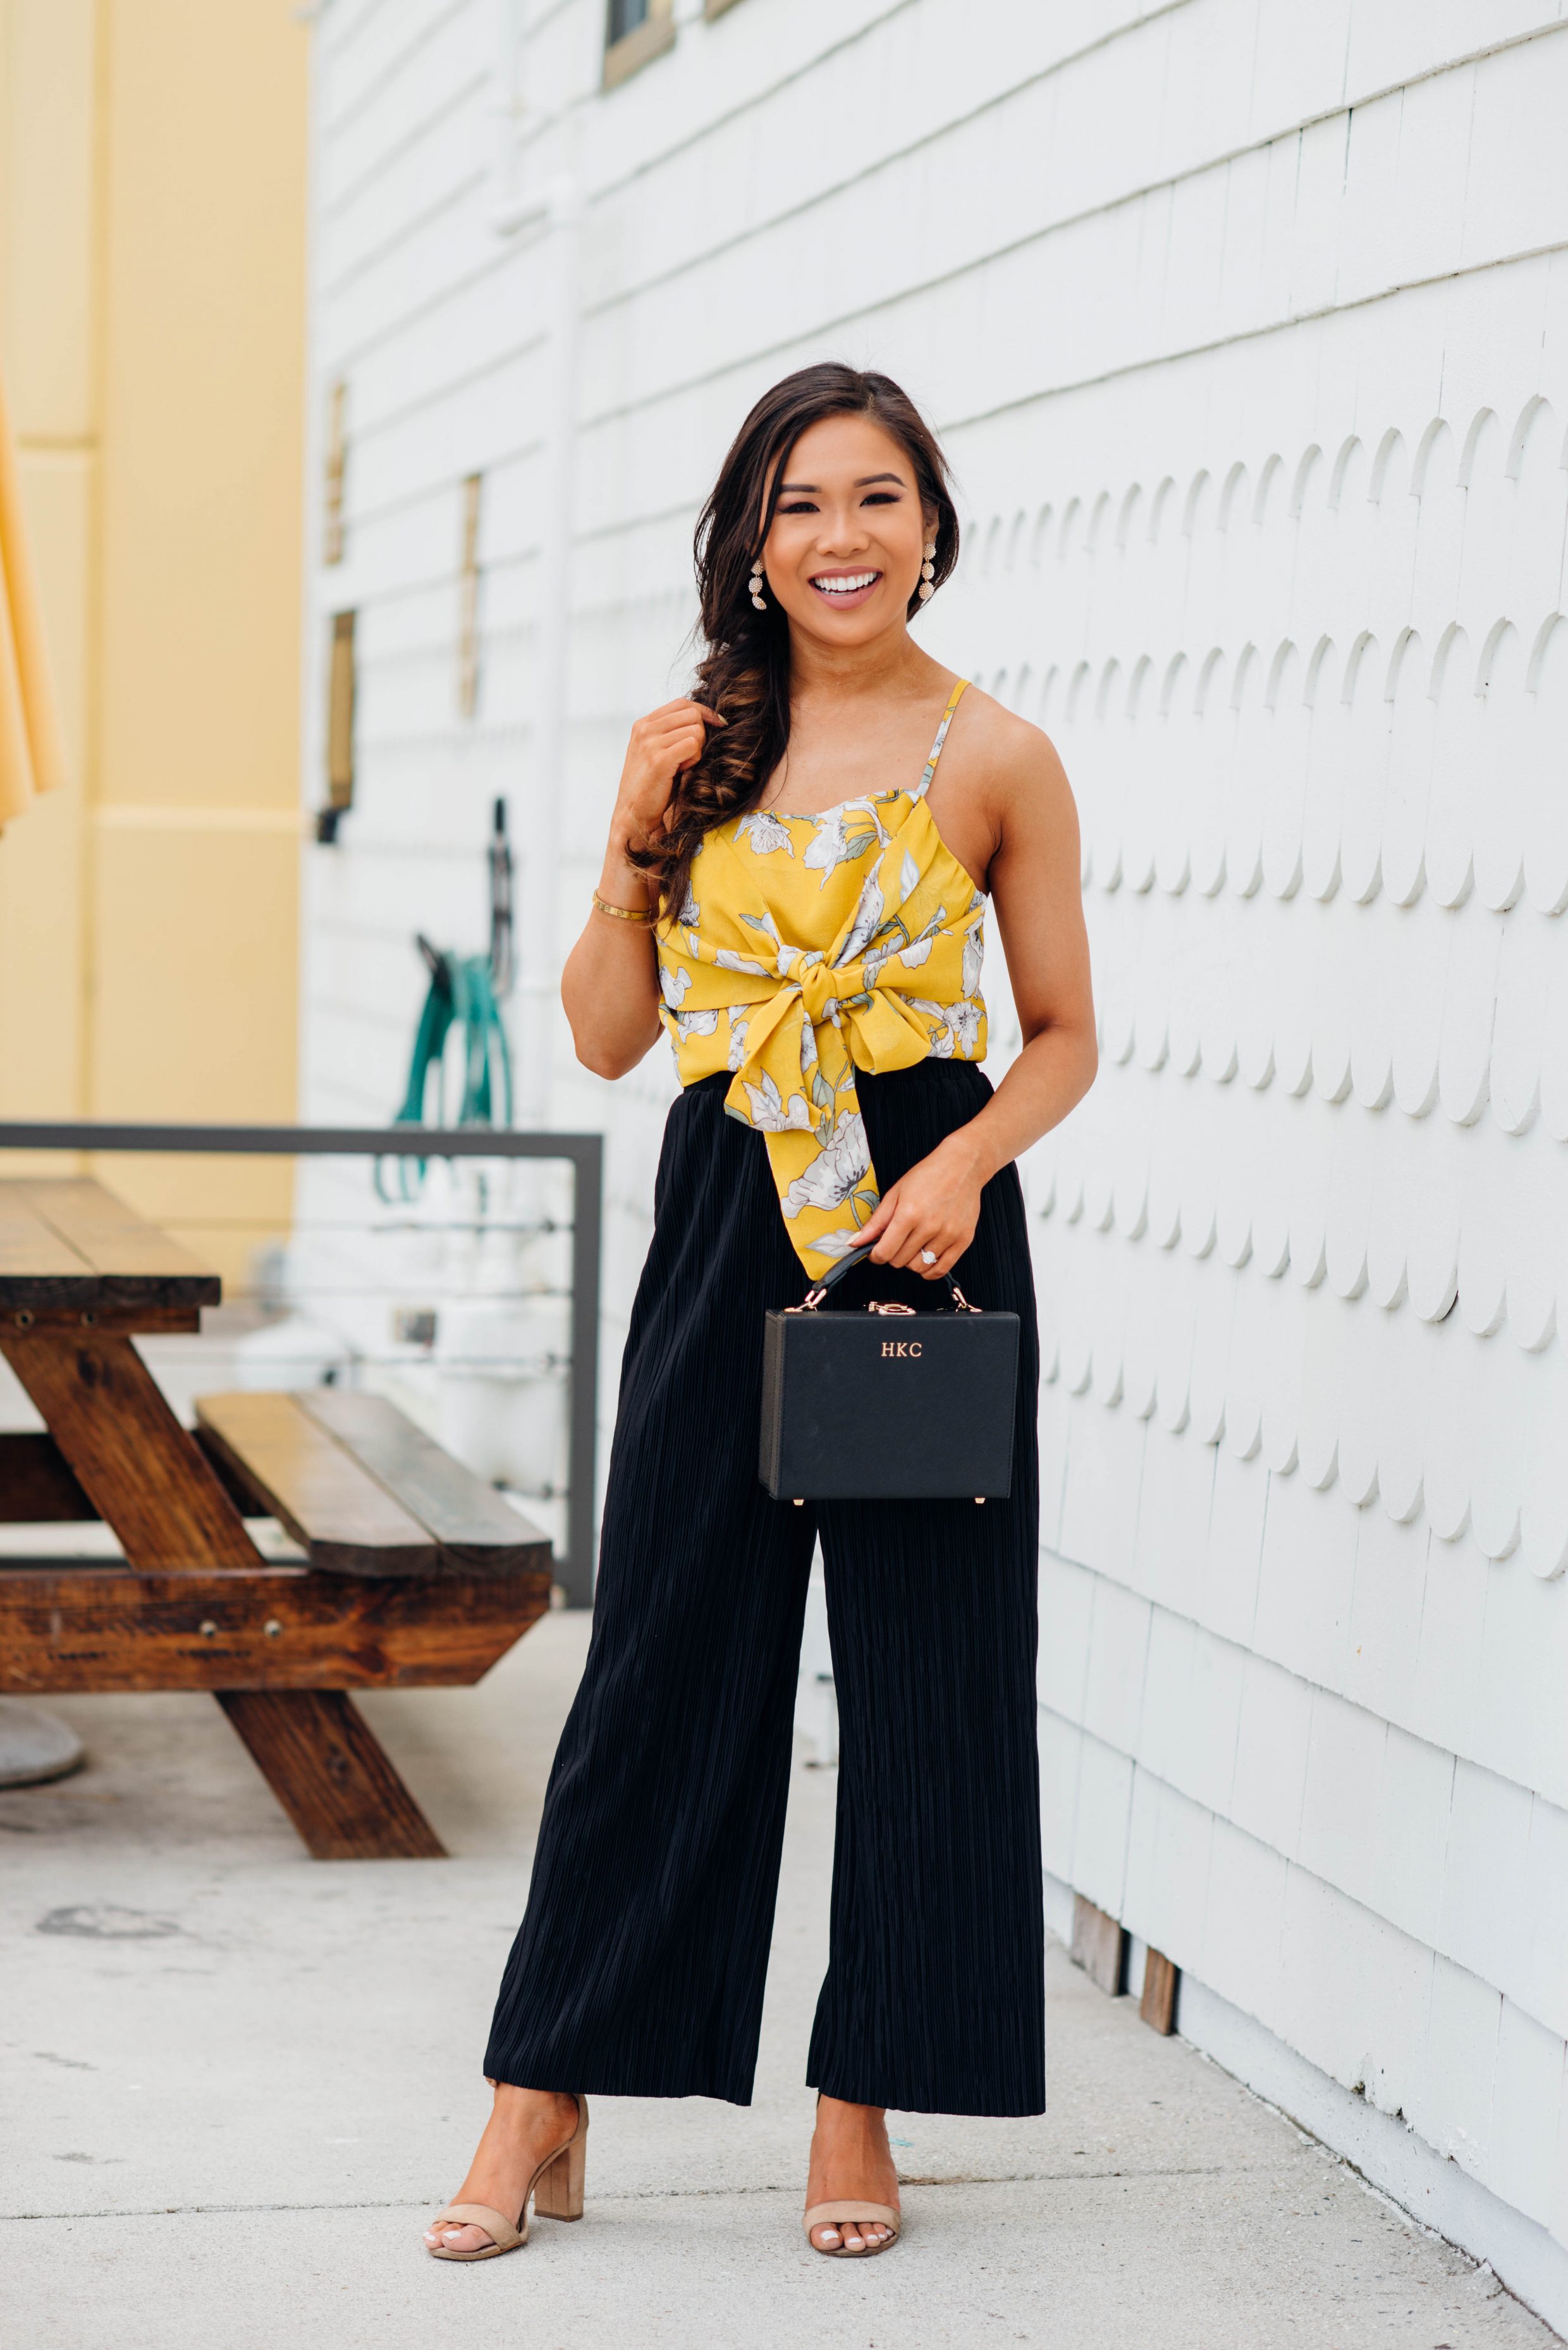 Hoang-Kim styles a crop top with black wide-leg pants and fishtail braid